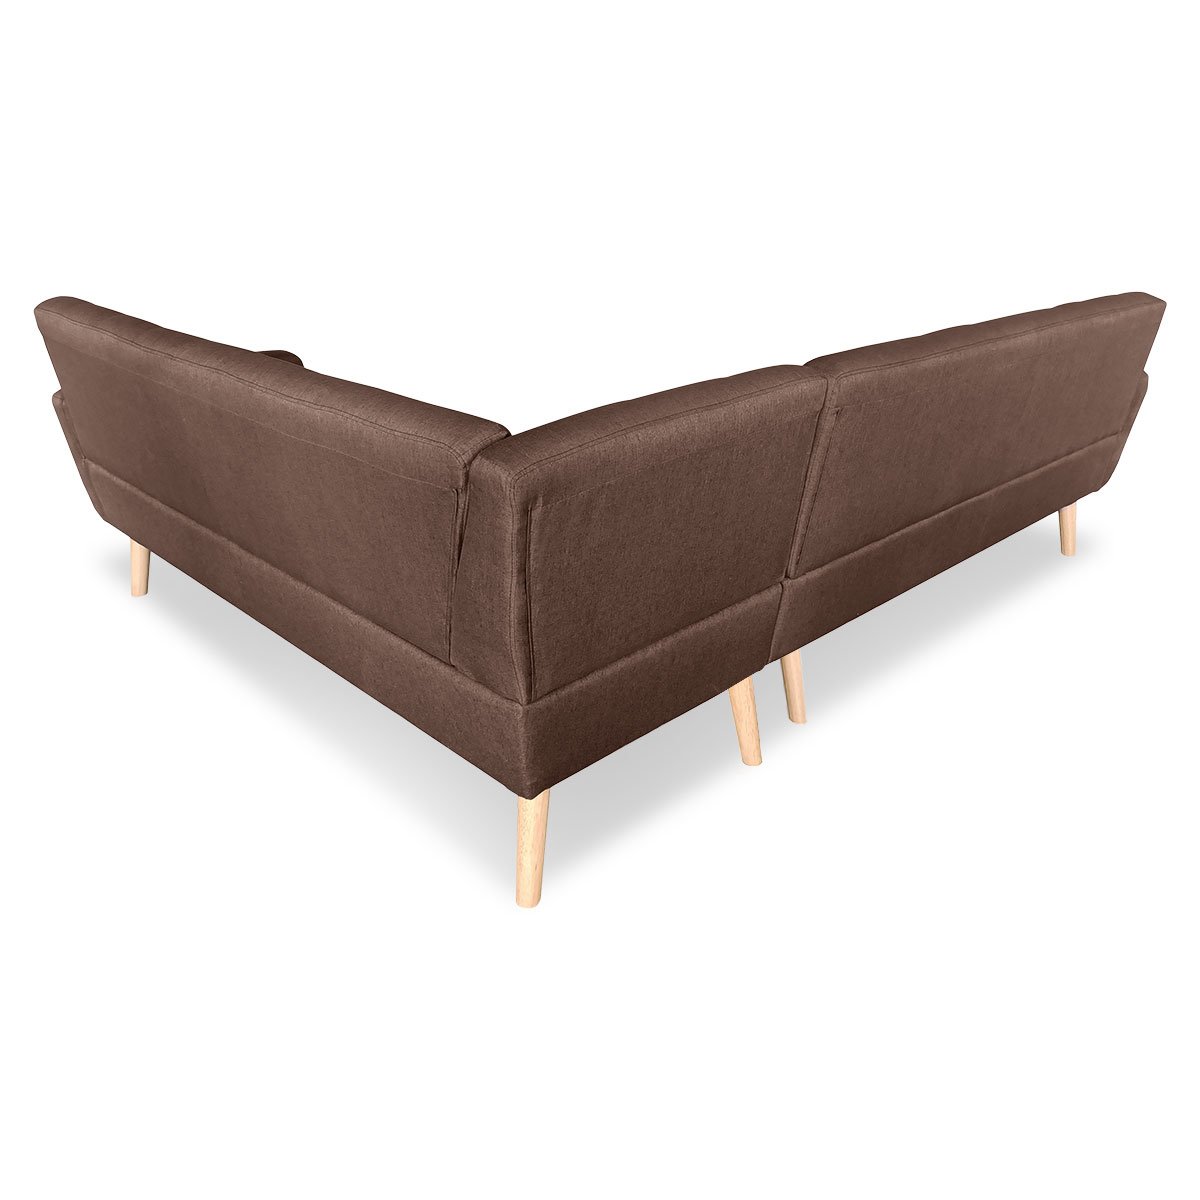 indoor furniture Linen Corner Wooden Sofa Lounge L-shaped Futon with Chaise Brown